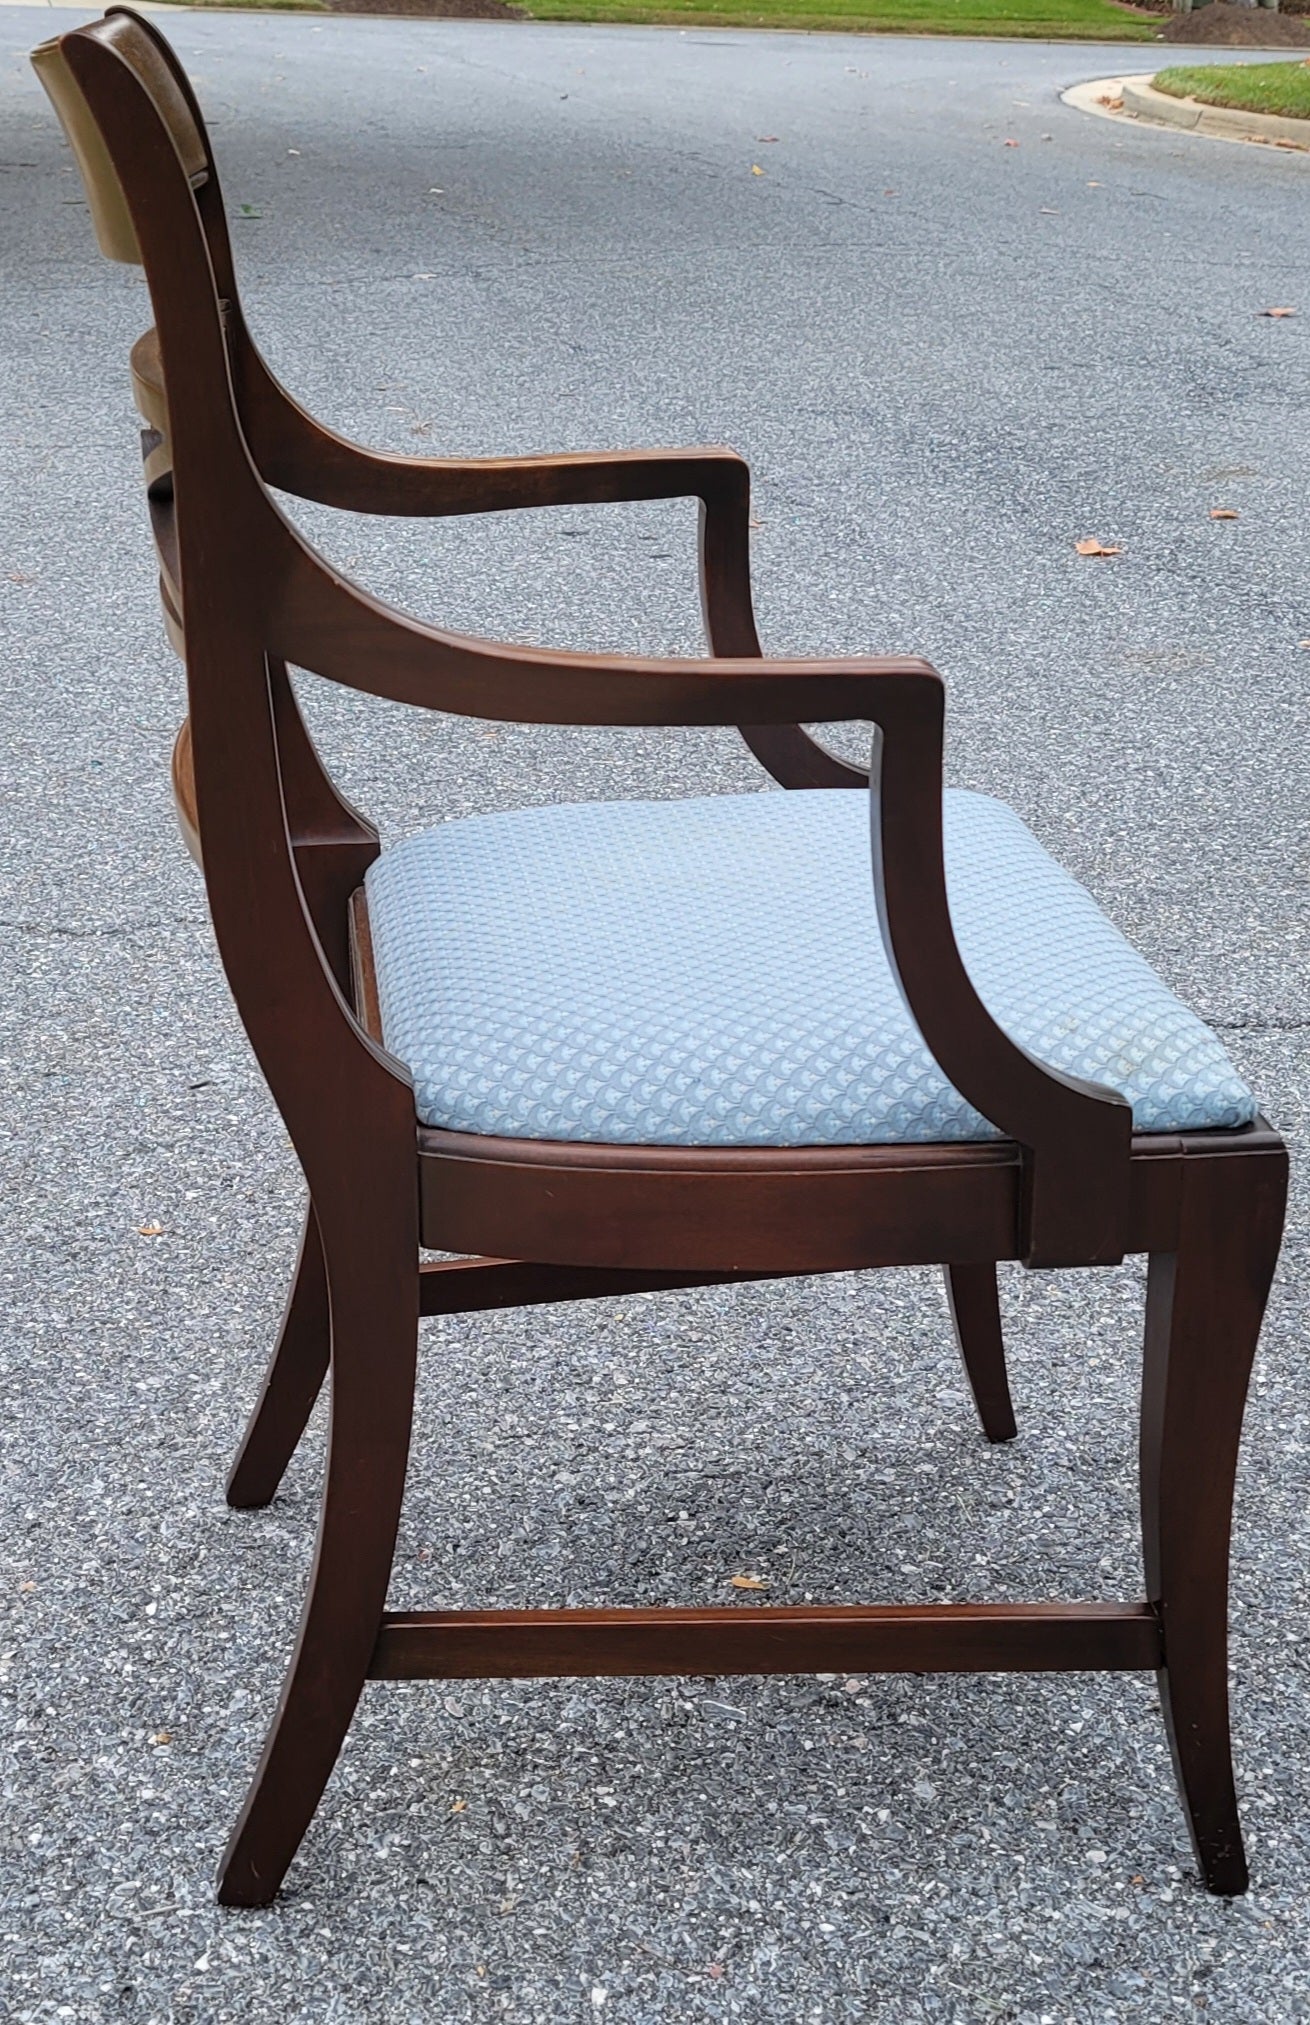 American 1920s Estey Manufacturing Magogany Upholstered Arm Chairs For Sale